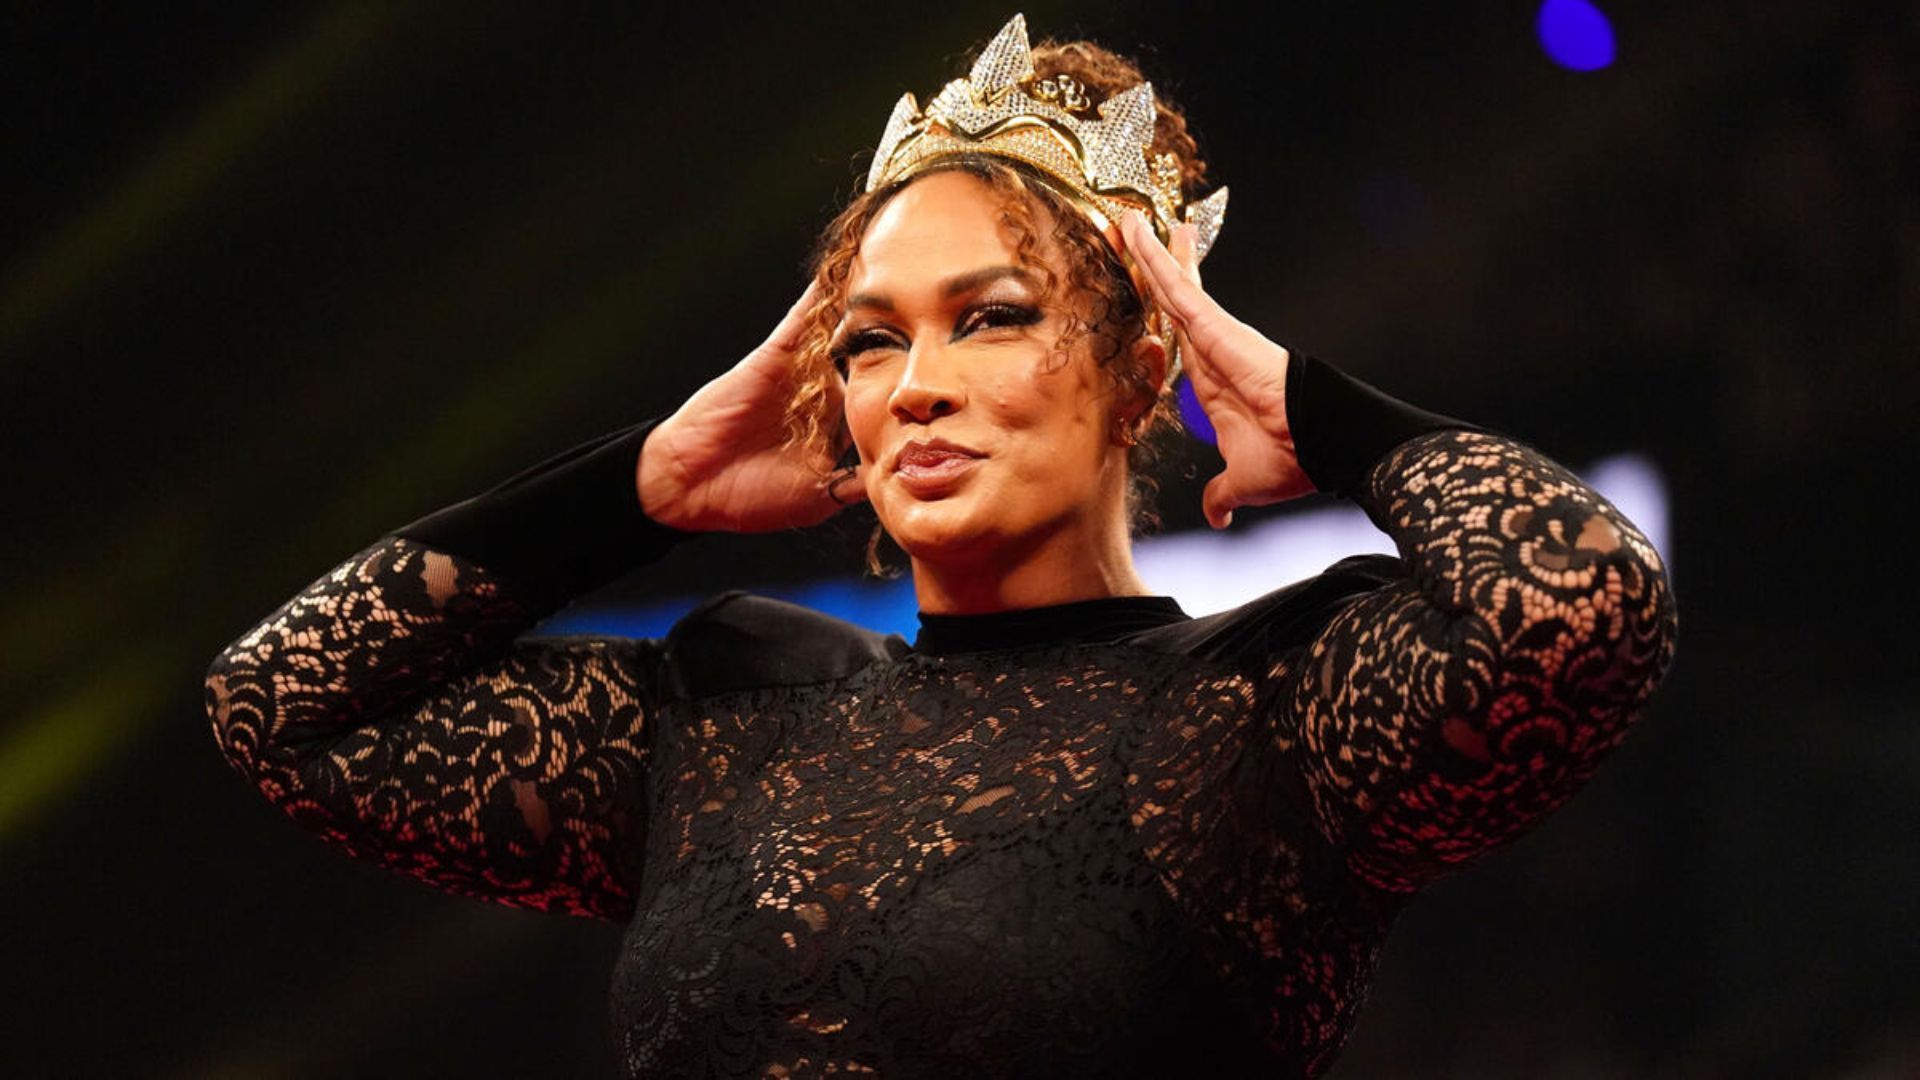 Nia Jax, the Queen of the Ring [Image credits: WWE.com]